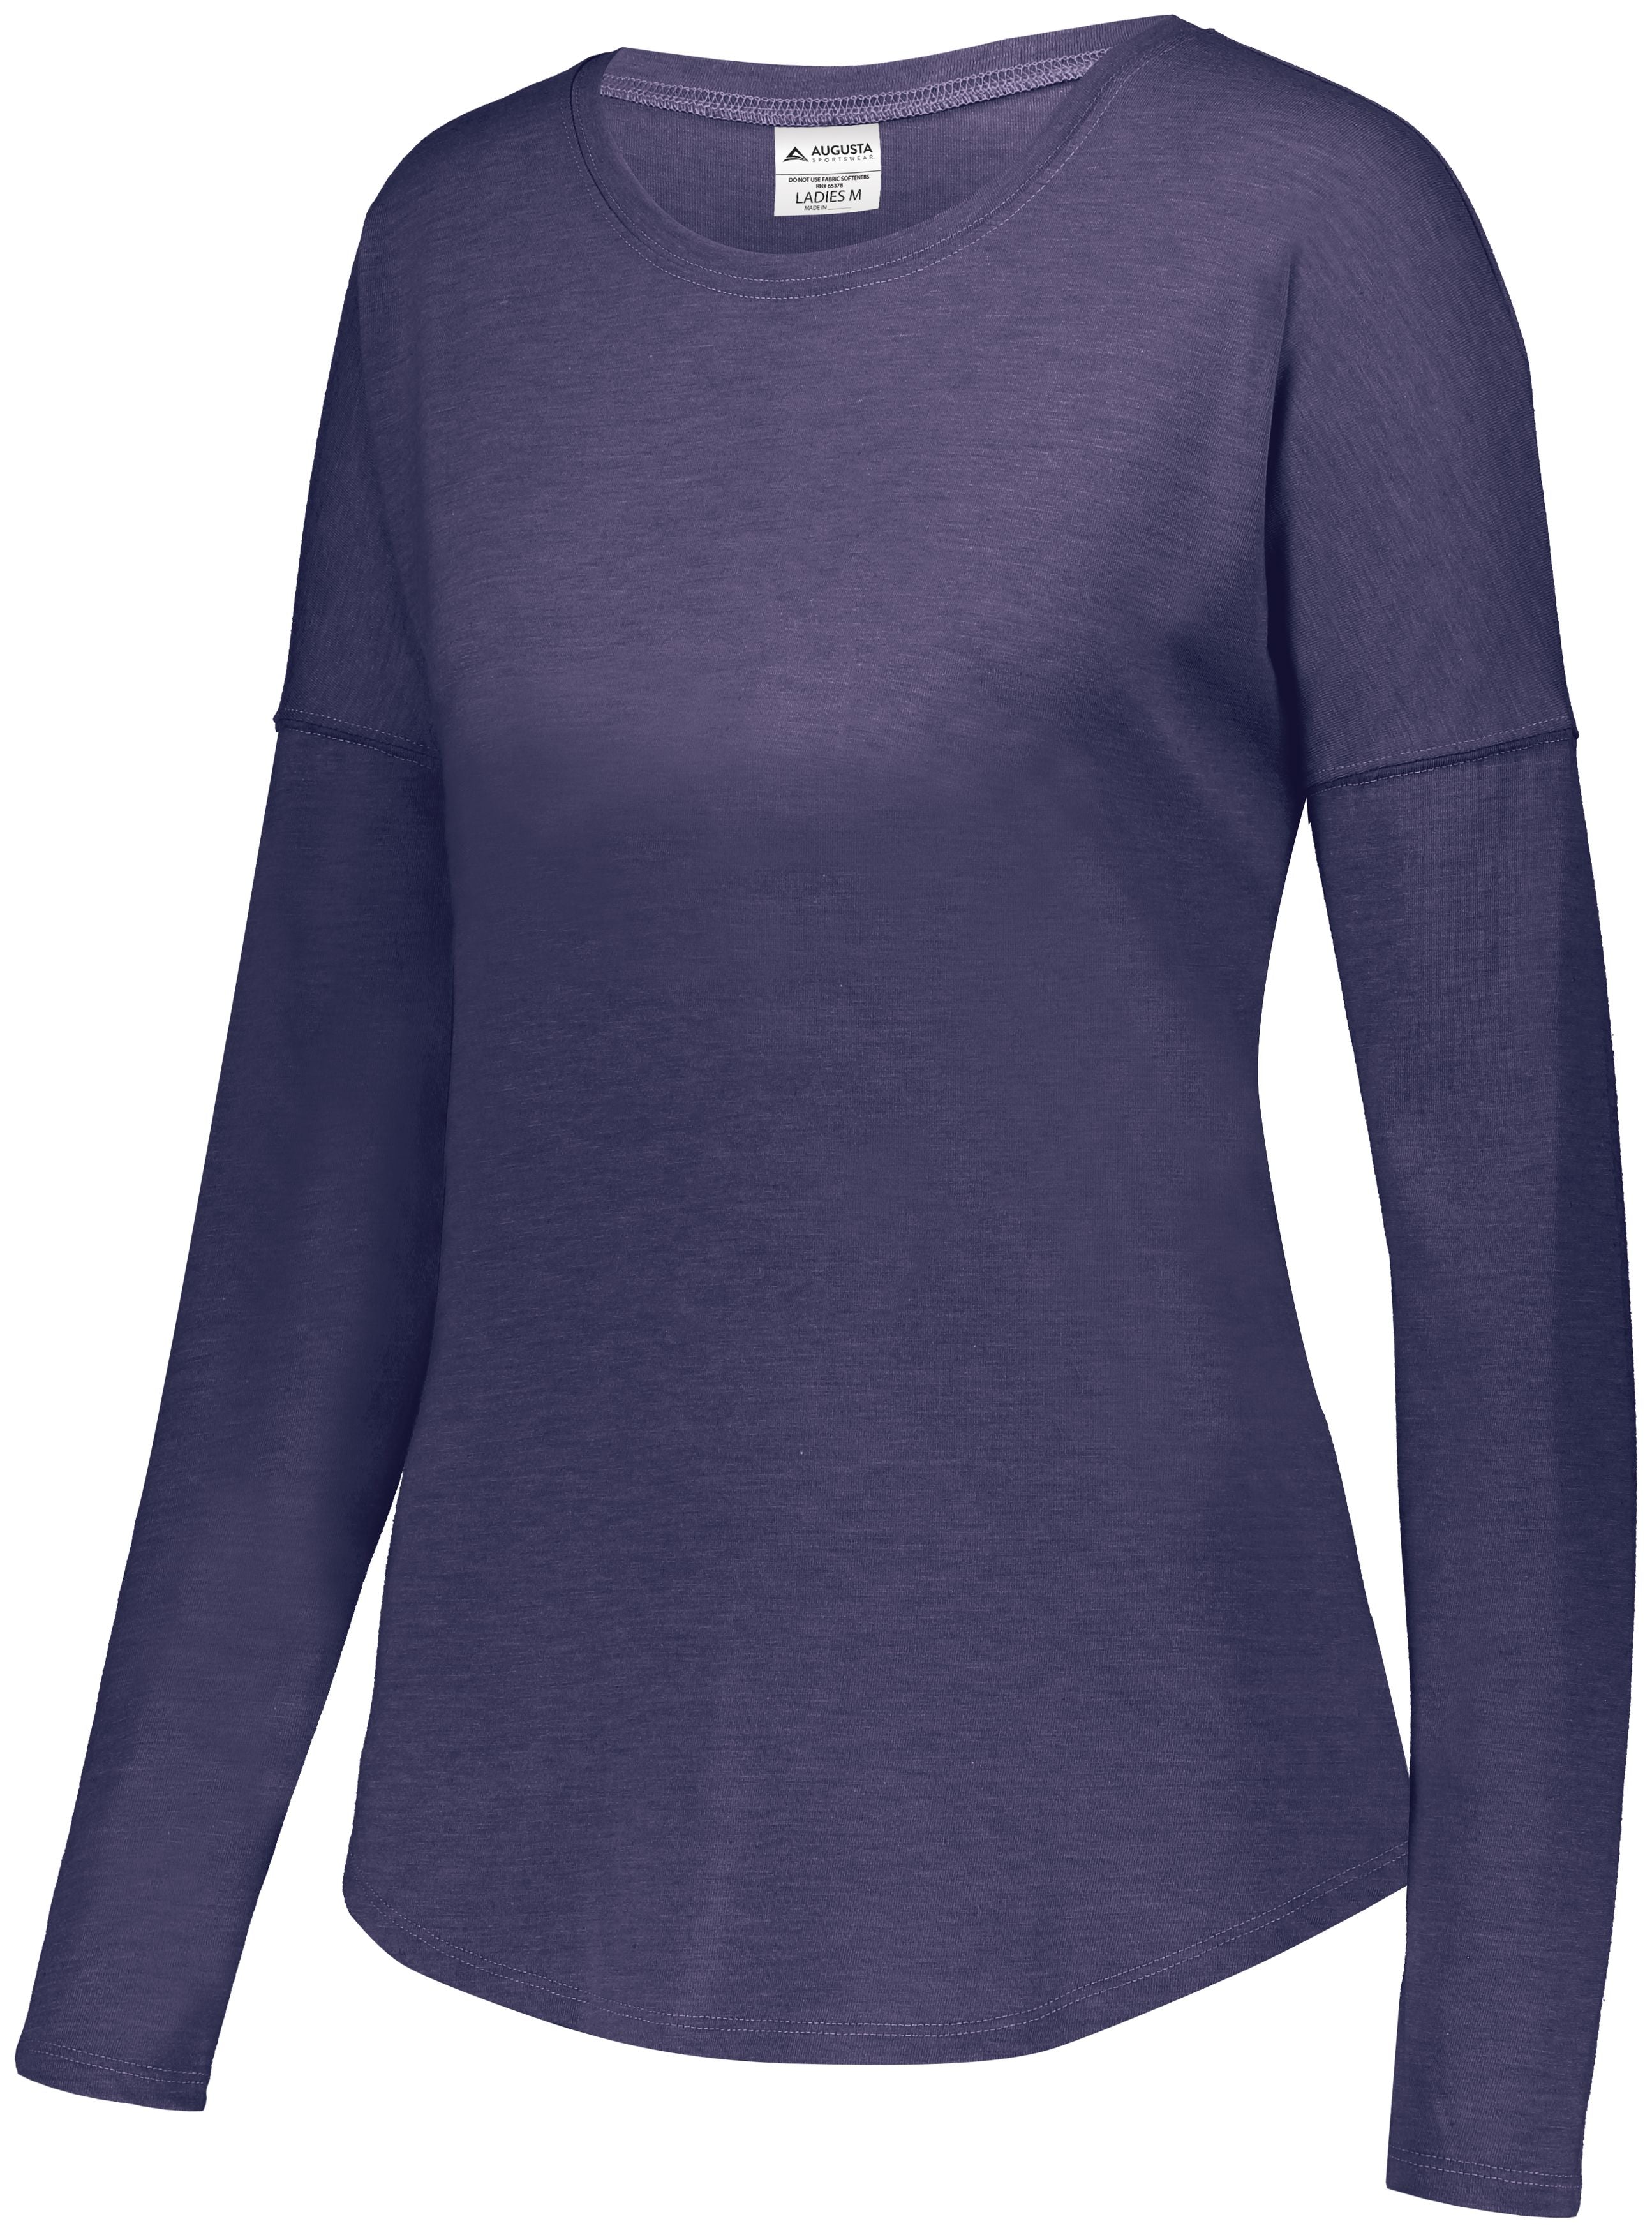 Augusta Sportswear Ladies Lux Tri-Blend Long Sleeve Shirt in Navy Heather  -Part of the Ladies, Augusta-Products, Shirts product lines at KanaleyCreations.com